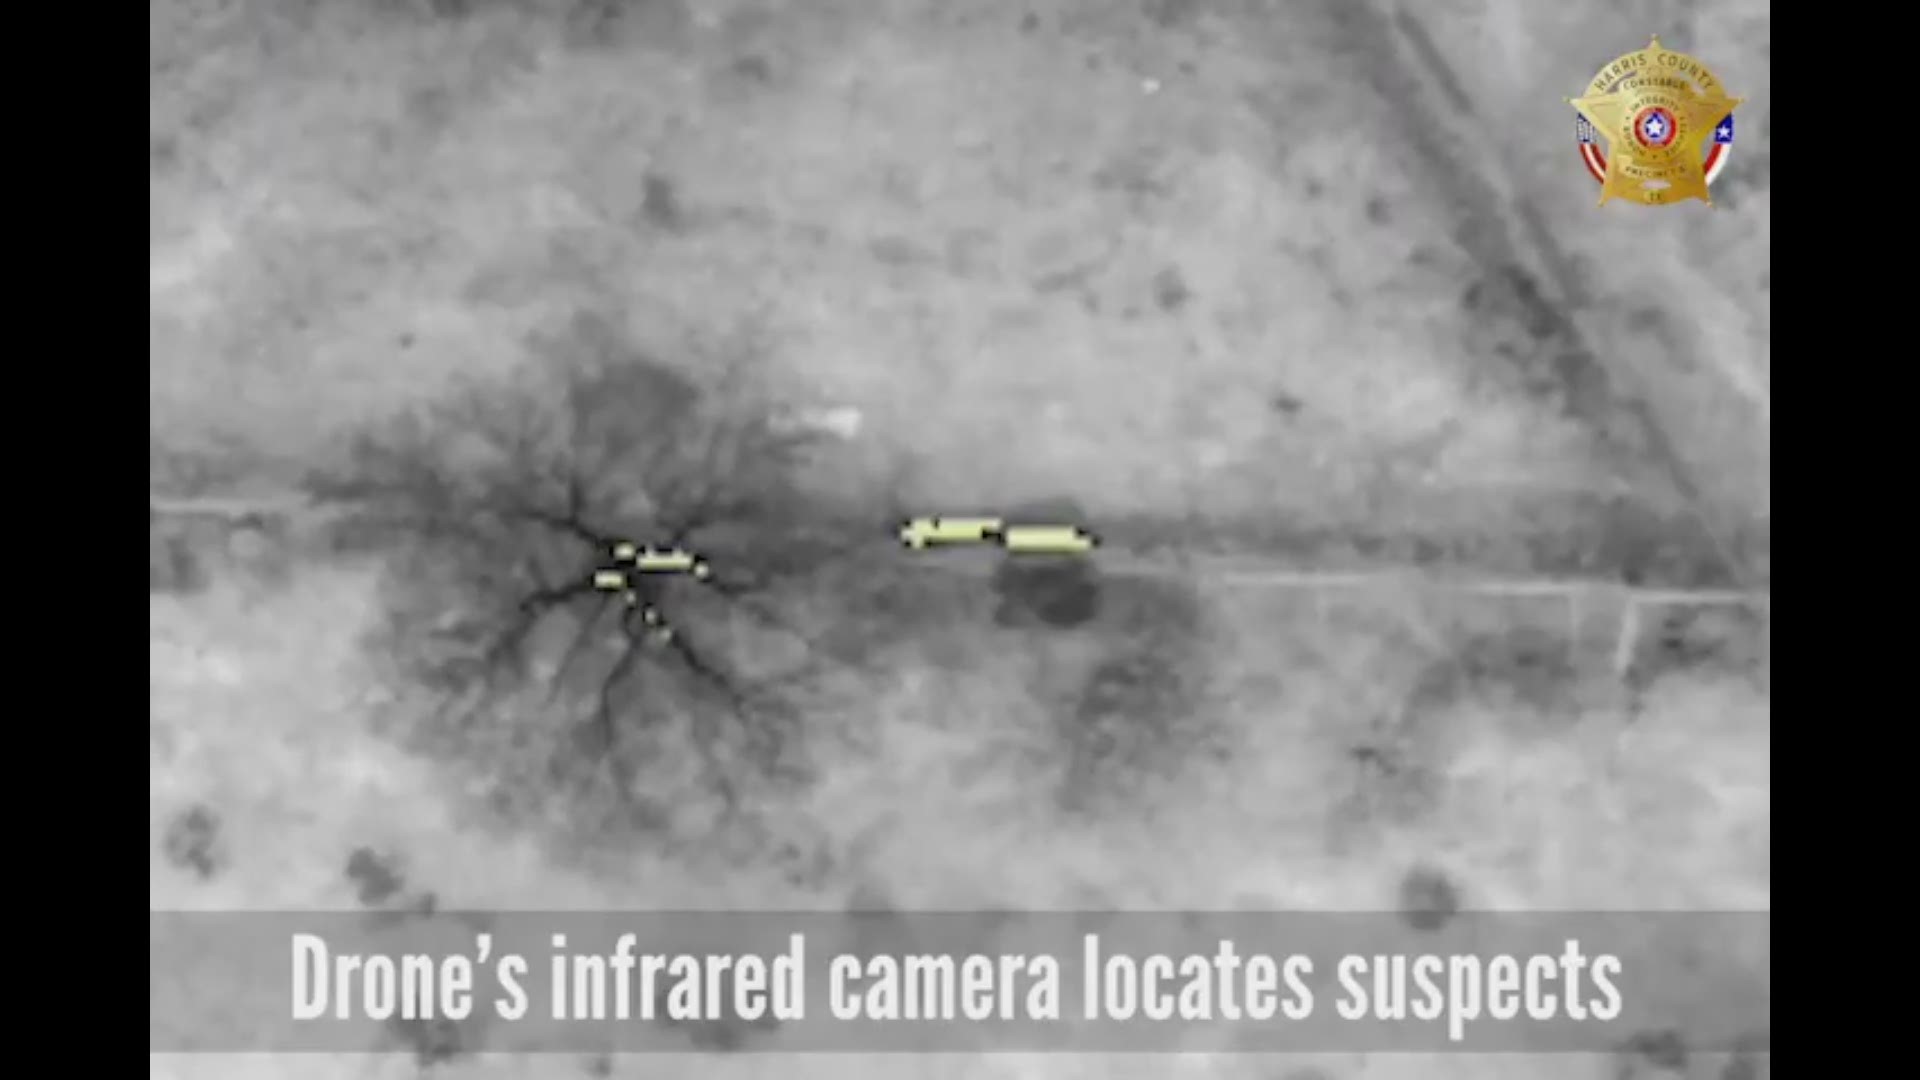 The drone video helped deputies find two suspects who were hiding in a backyard.